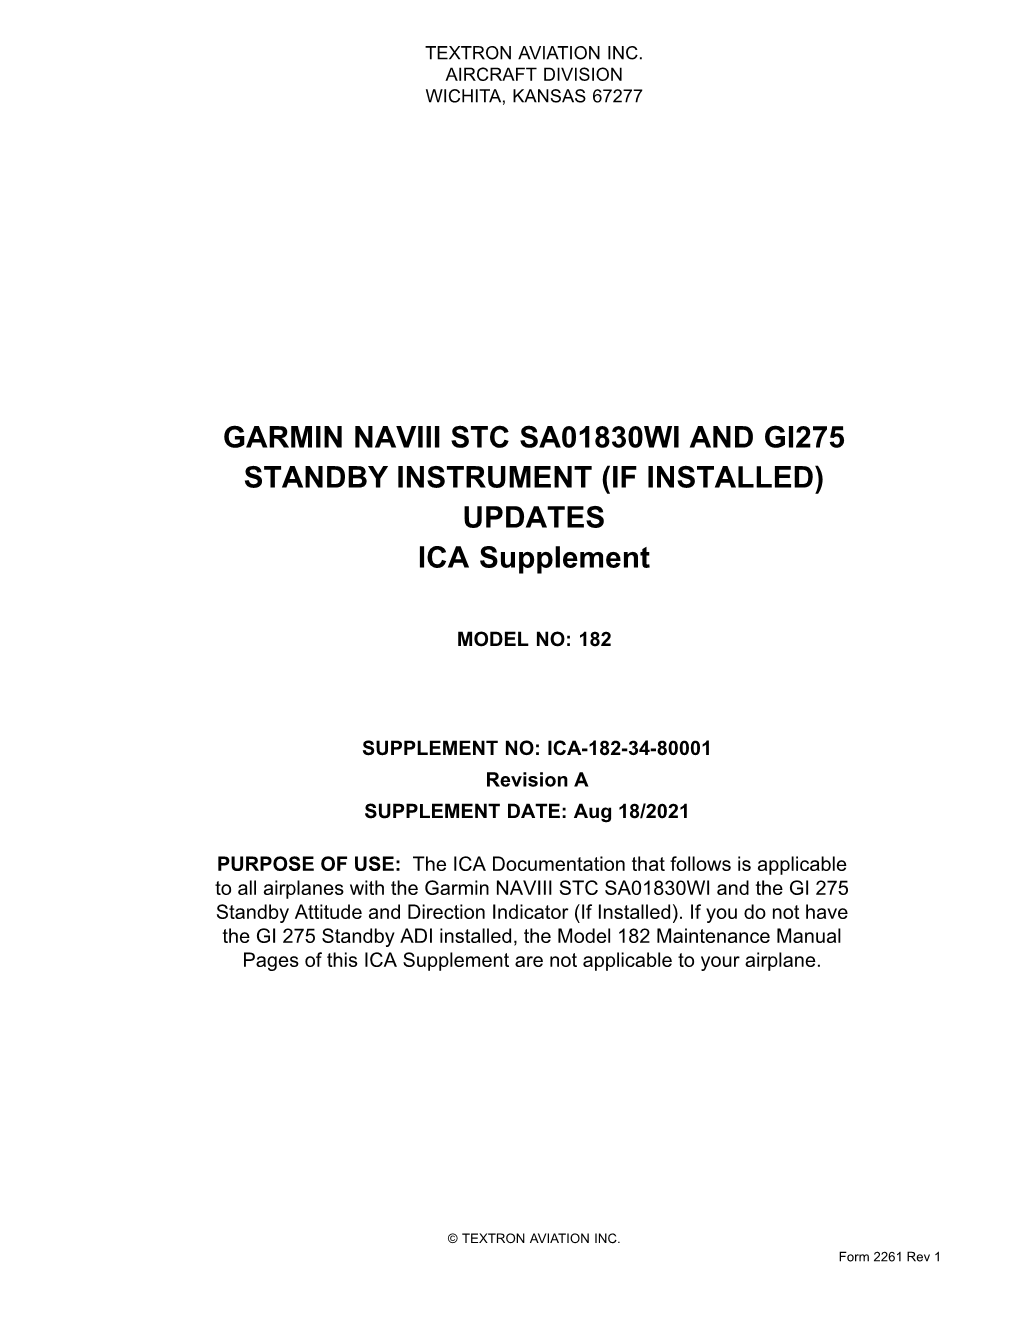 GARMIN NAVIII STC SA01830WI and GI275 STANDBY INSTRUMENT (IF INSTALLED) UPDATES ICA Supplement